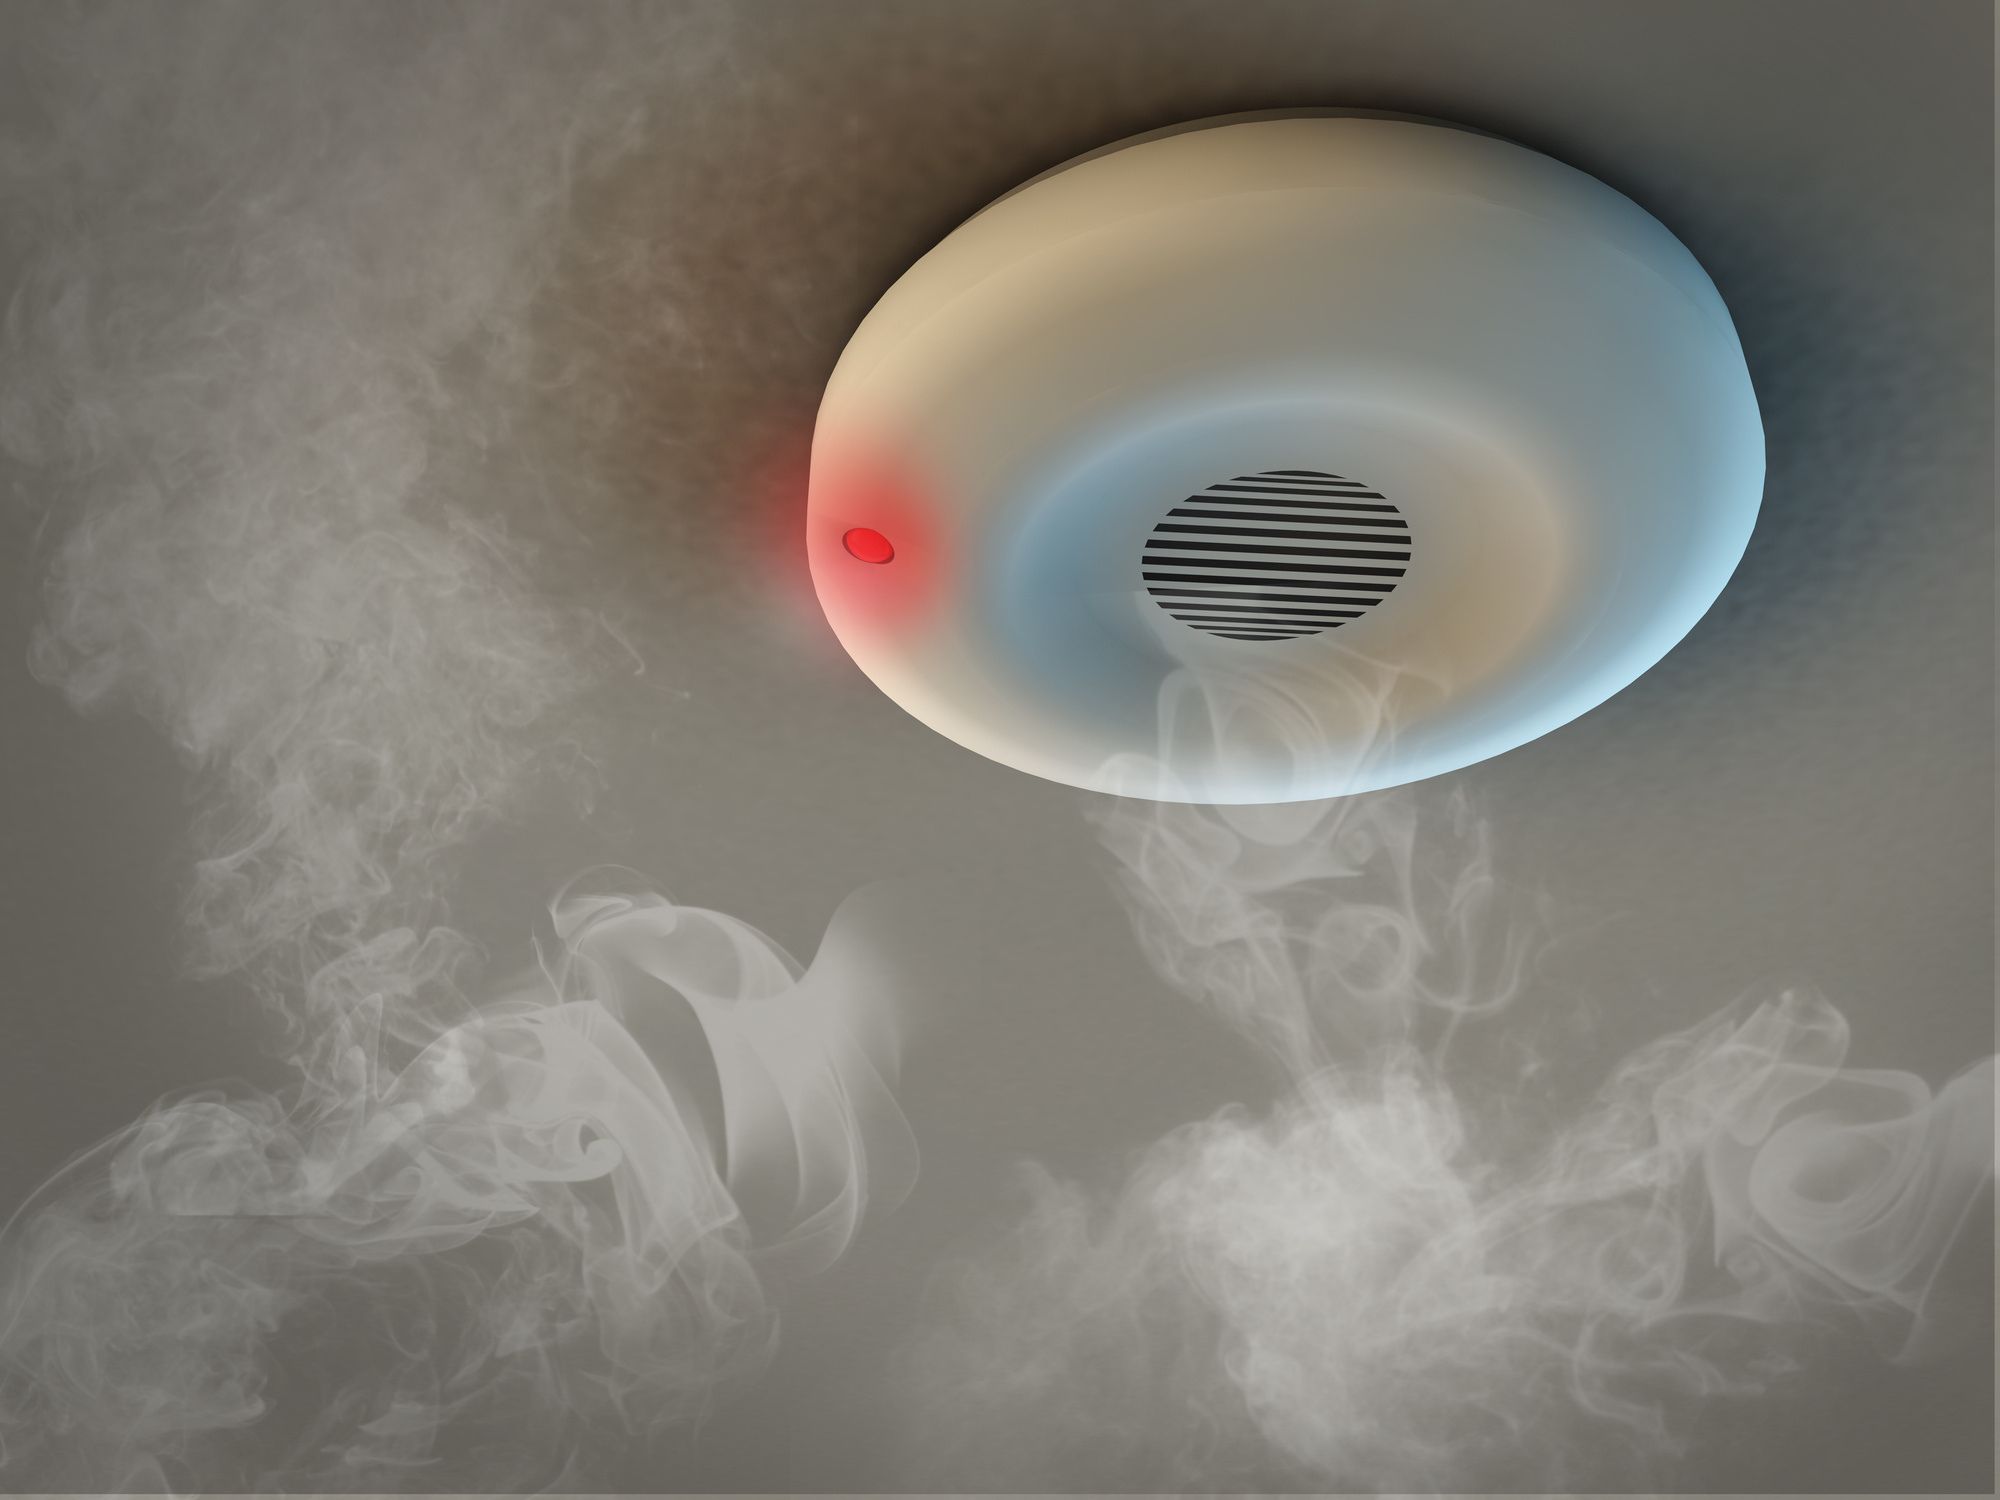 How Does A Smoke Detector Work?